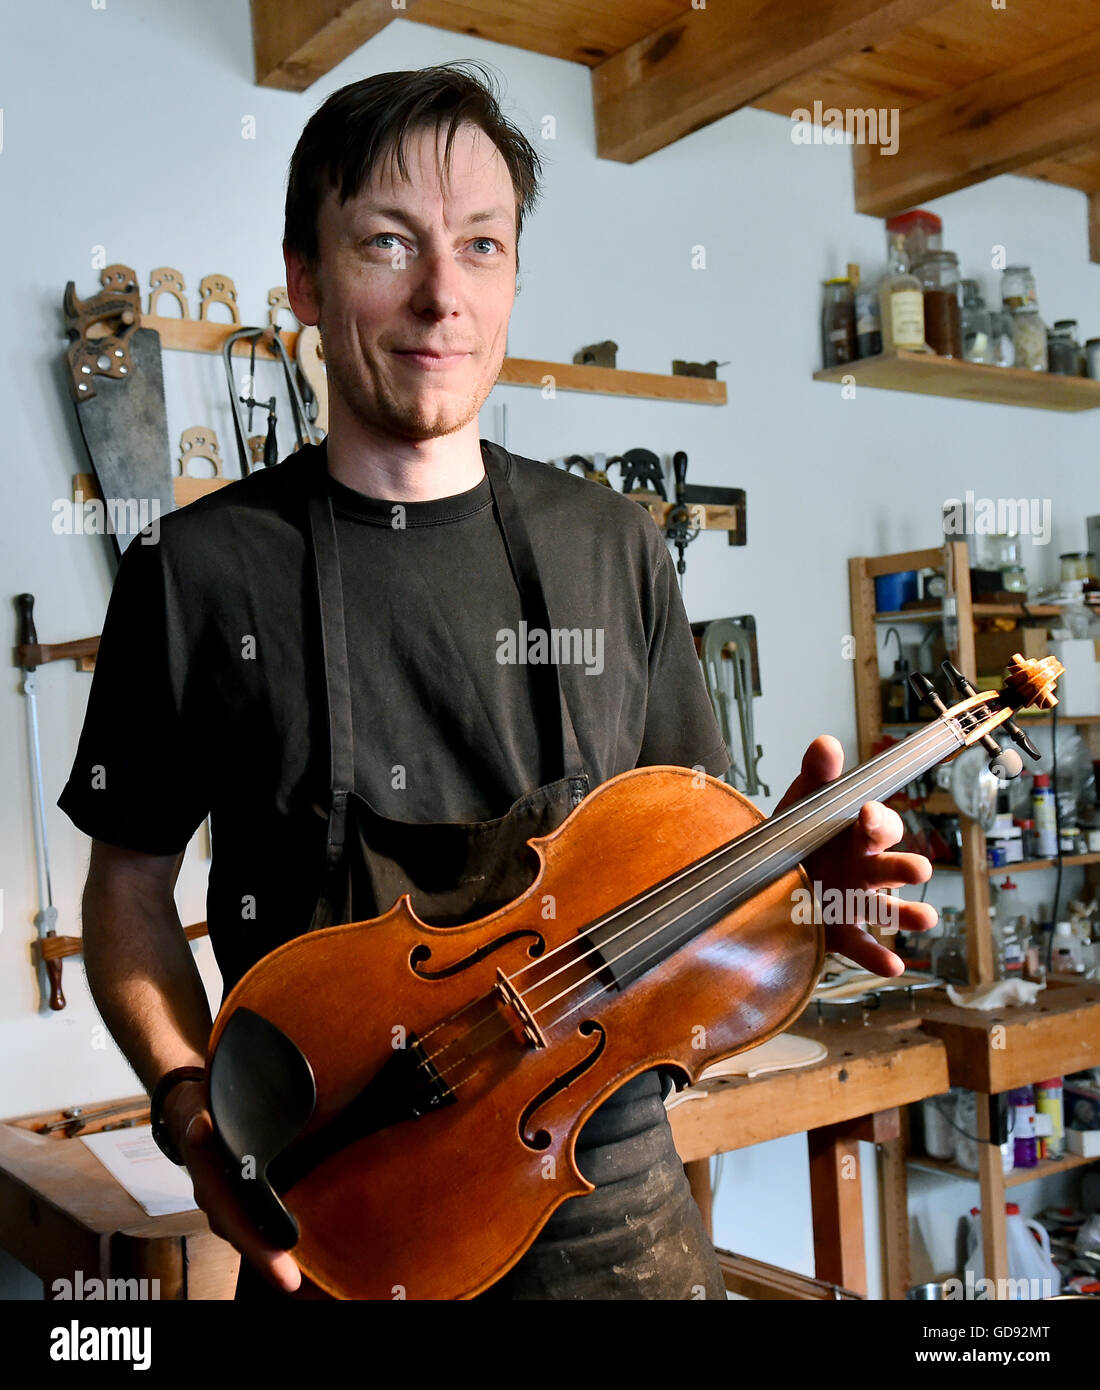 Instrument maker Ian Crawford McWilliams holds a finished viola in his hands in his workshop in Brandenburg on the Havel, Germany, 2 June 2016. The Canadian McWilliams builds handmade fiddles, violas, cellos and chelys that are sold worldwide. Photo: Bernd Settnik/ZB Stock Photo